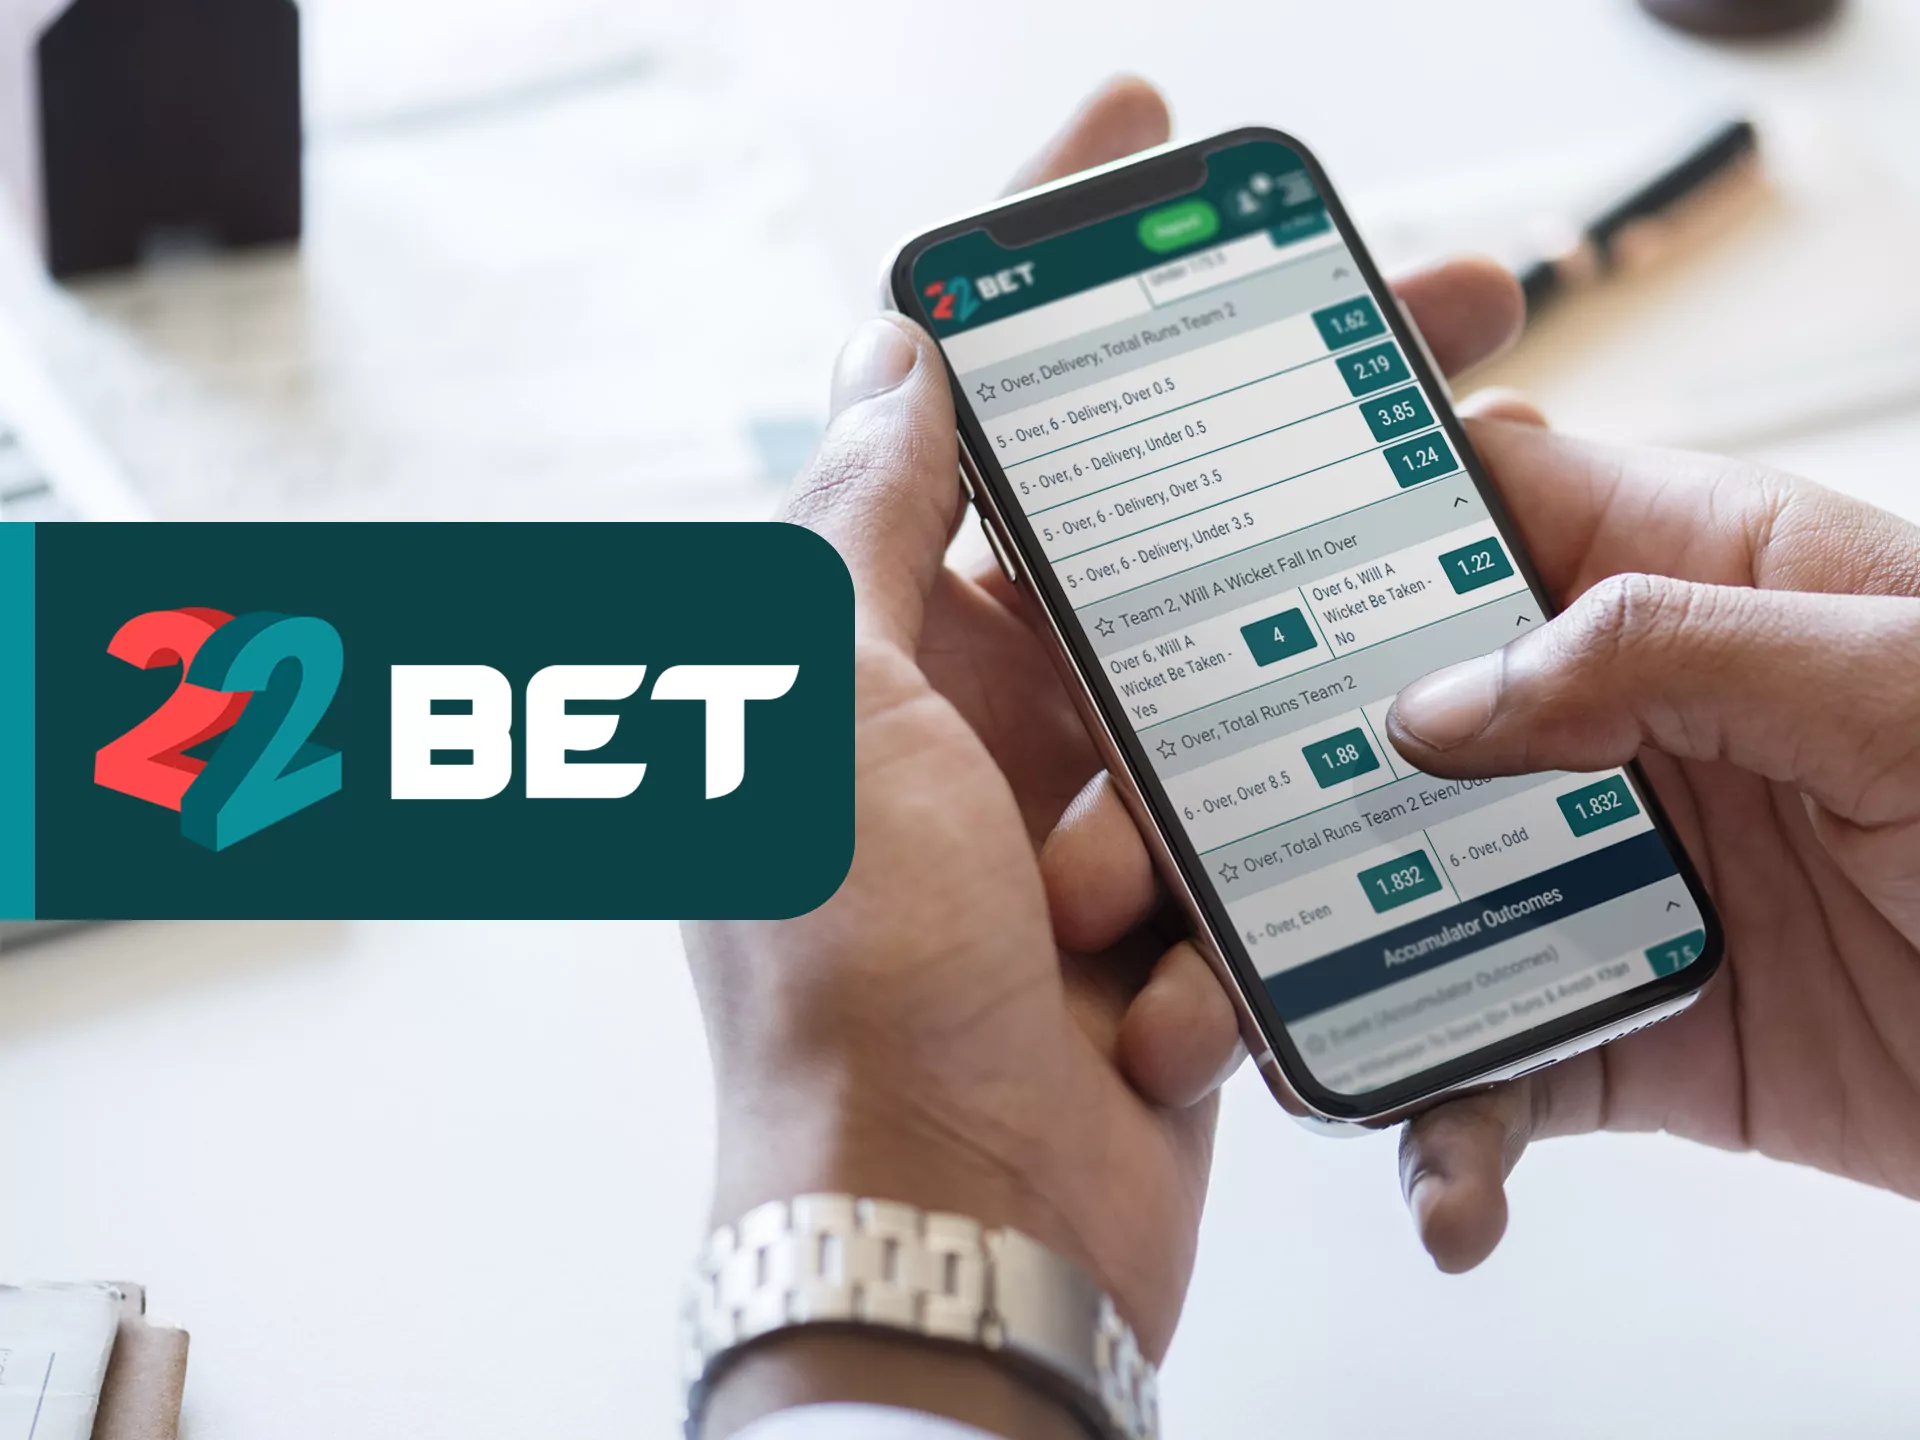 22bet has different markets for bets.